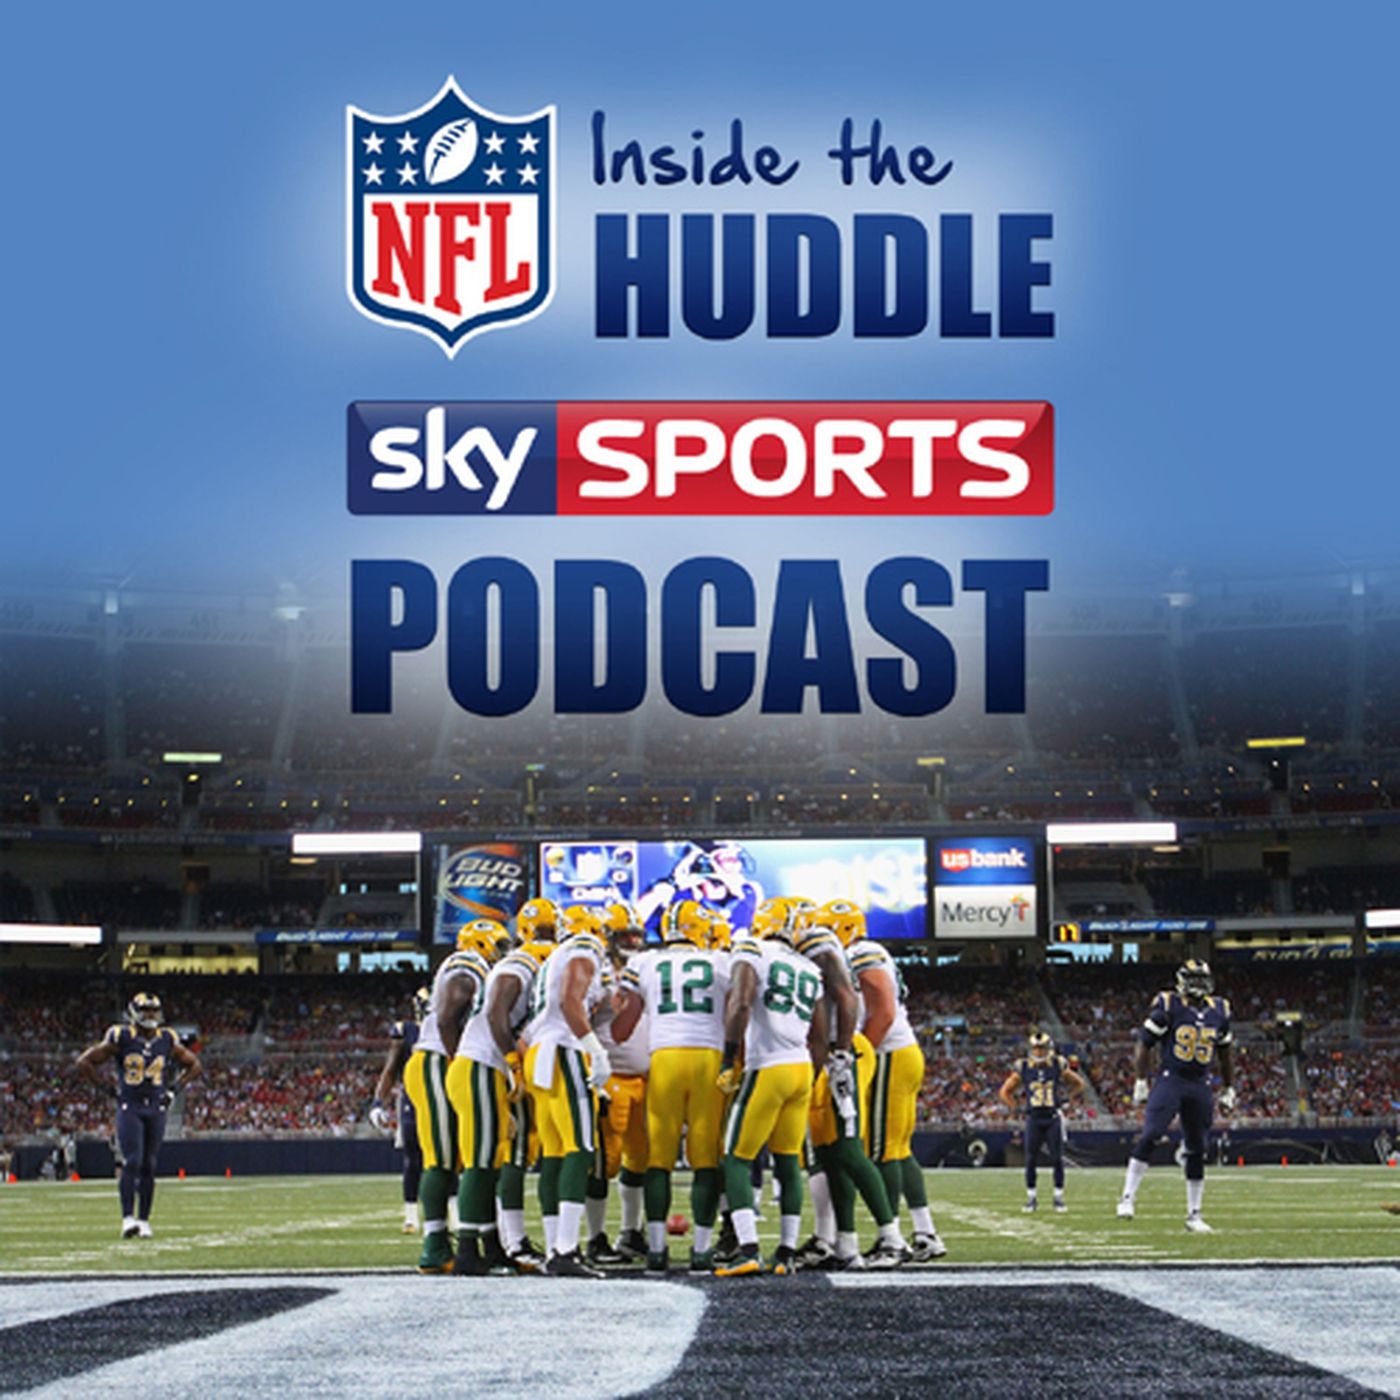 Inside the Huddle: Super Bowl LII recap and McDaniels discussion